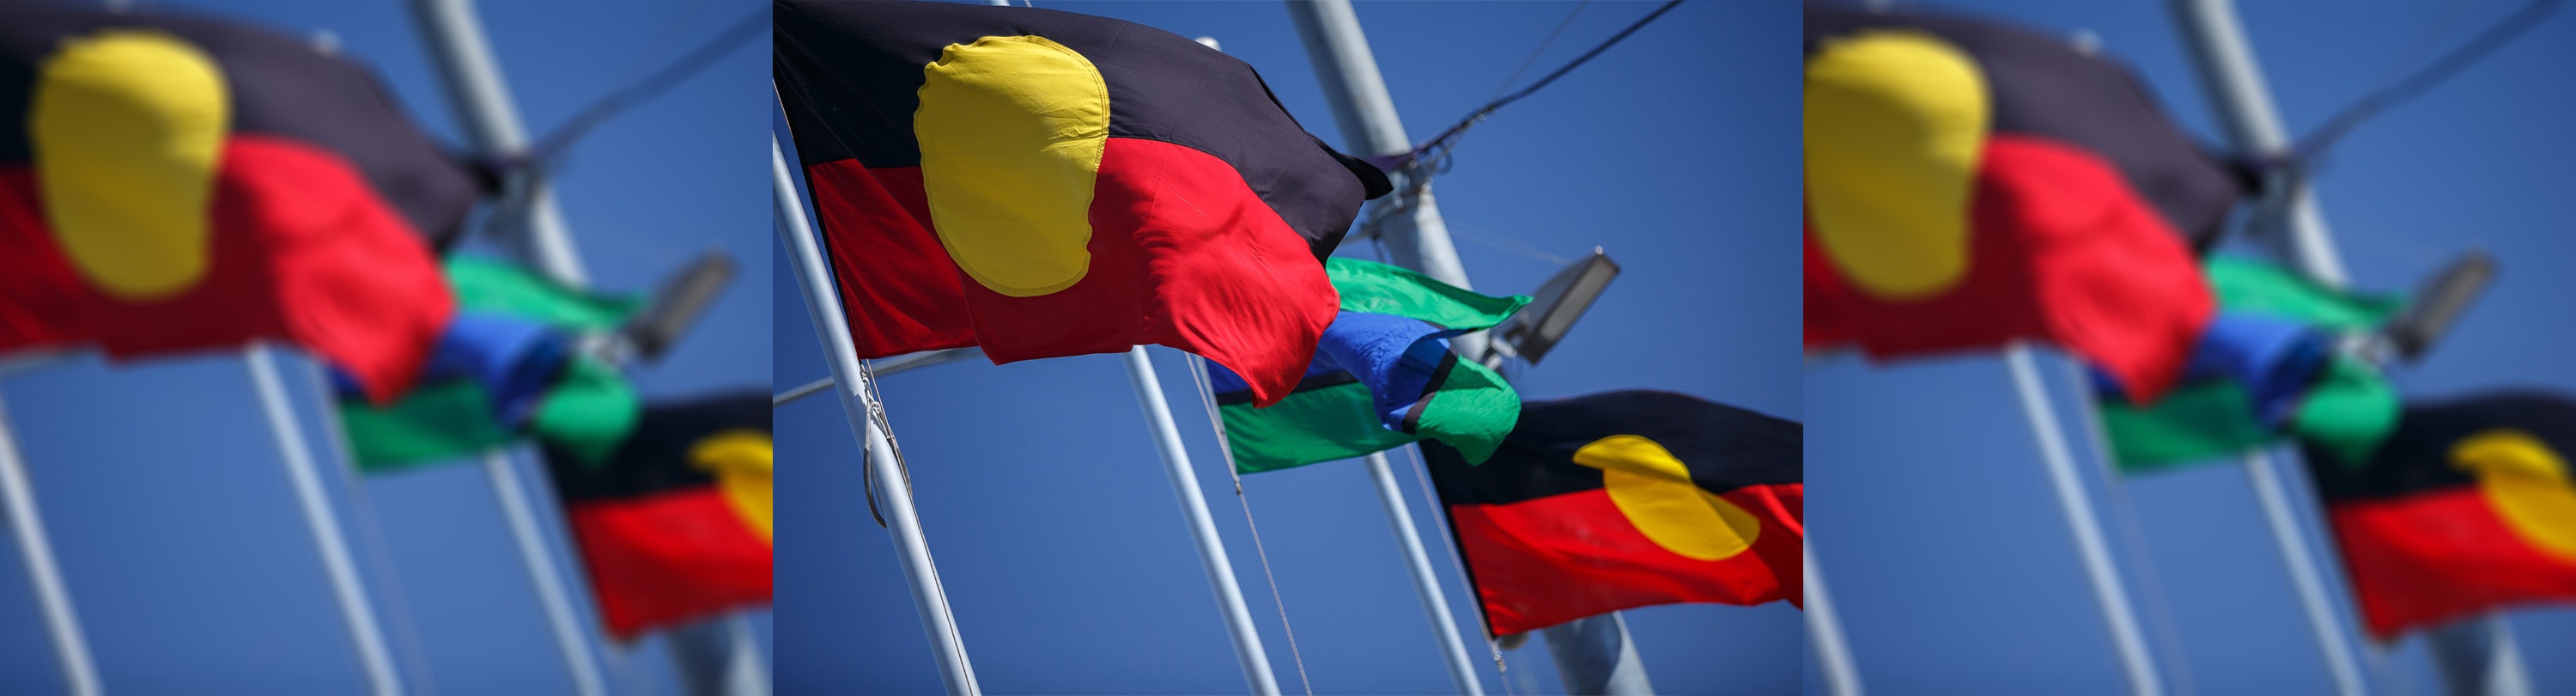 The Aboriginal and Torres Strait Island flags are waving in the wind on flag poles in front of a blue sky